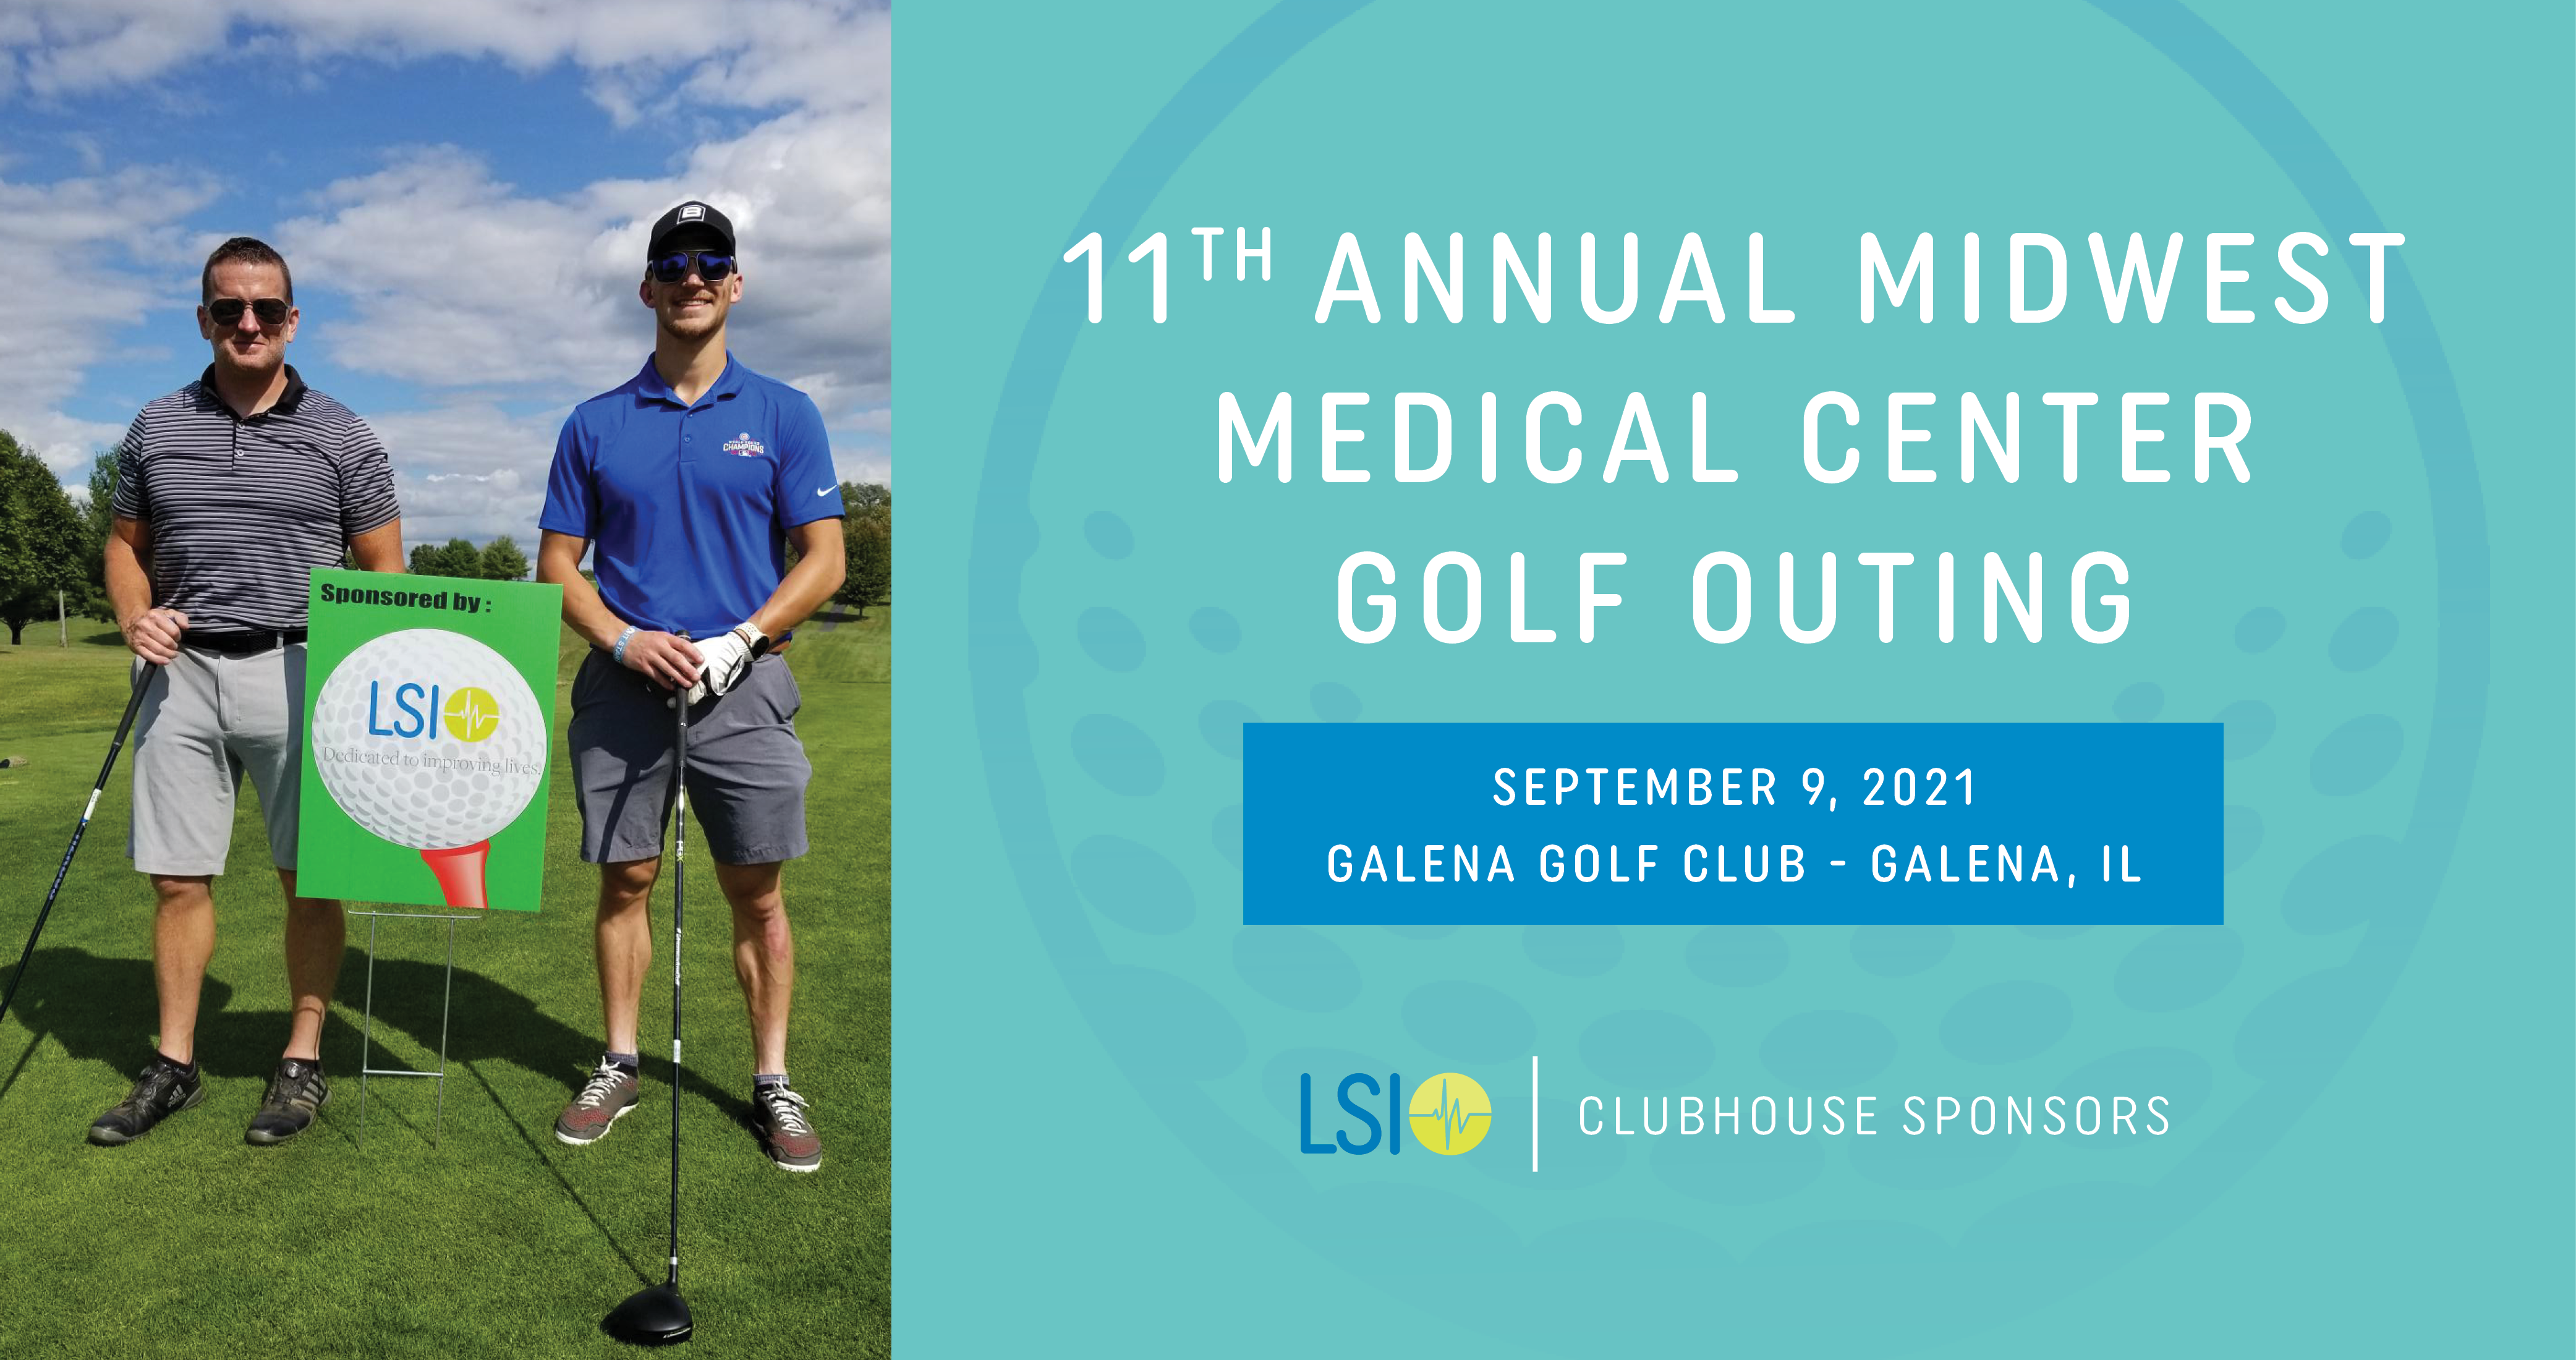 11th Annual Midwest Medical Center Golf Outing